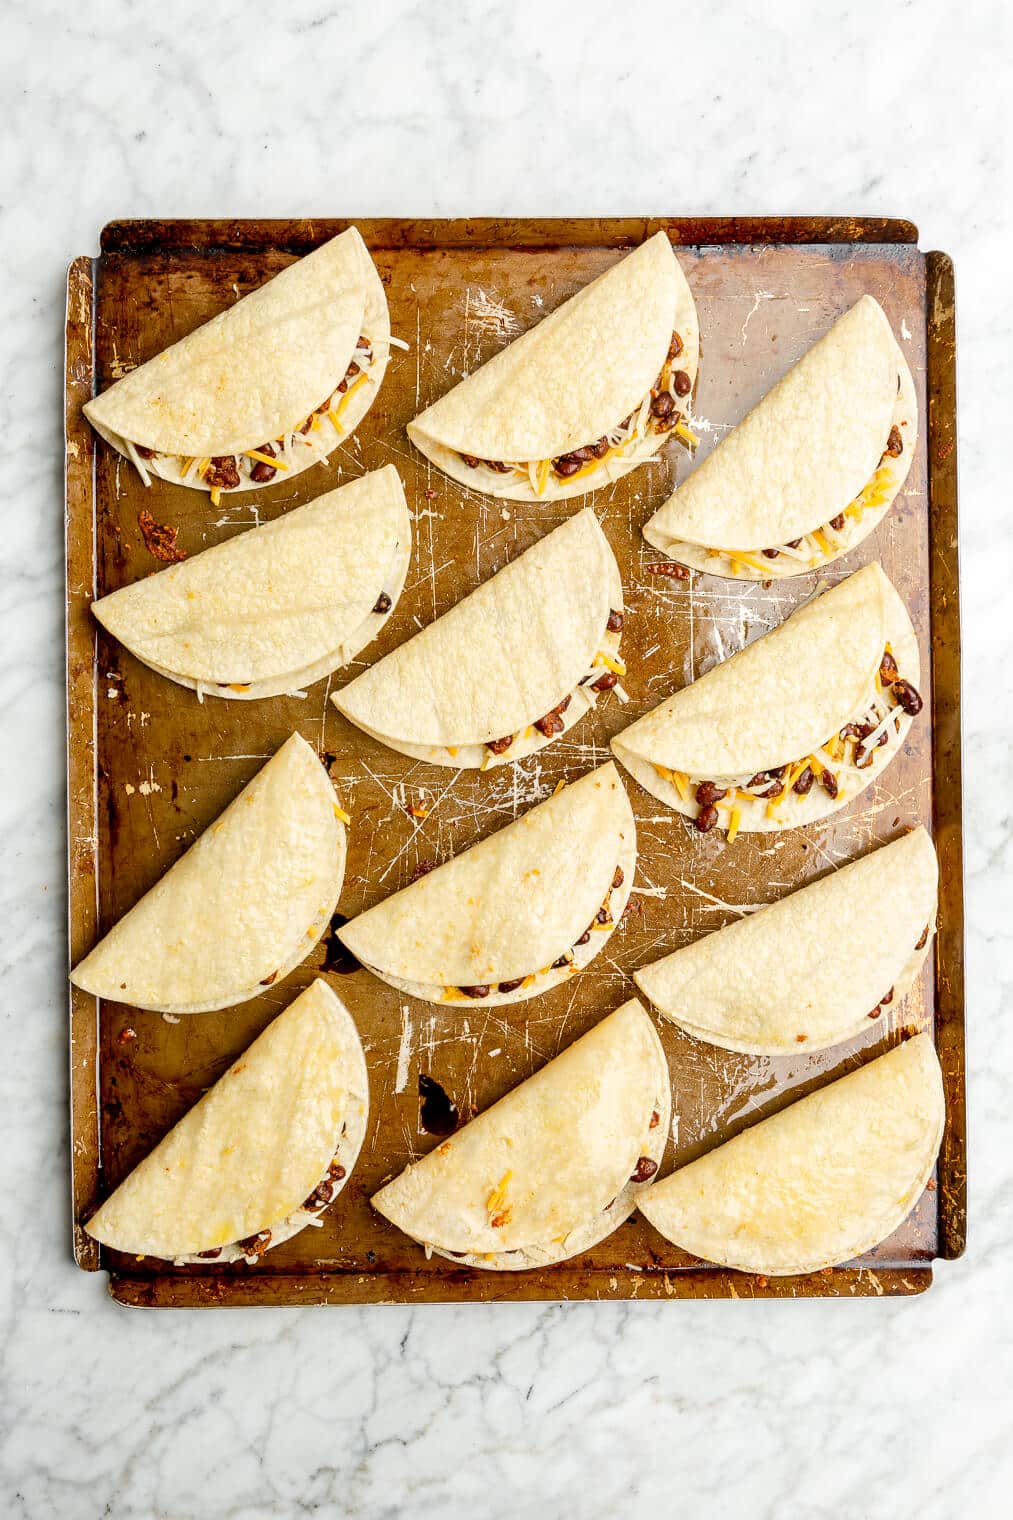 Top down of a metal sheet pan with 12 tortillas filled with beans and cheese folded in half.